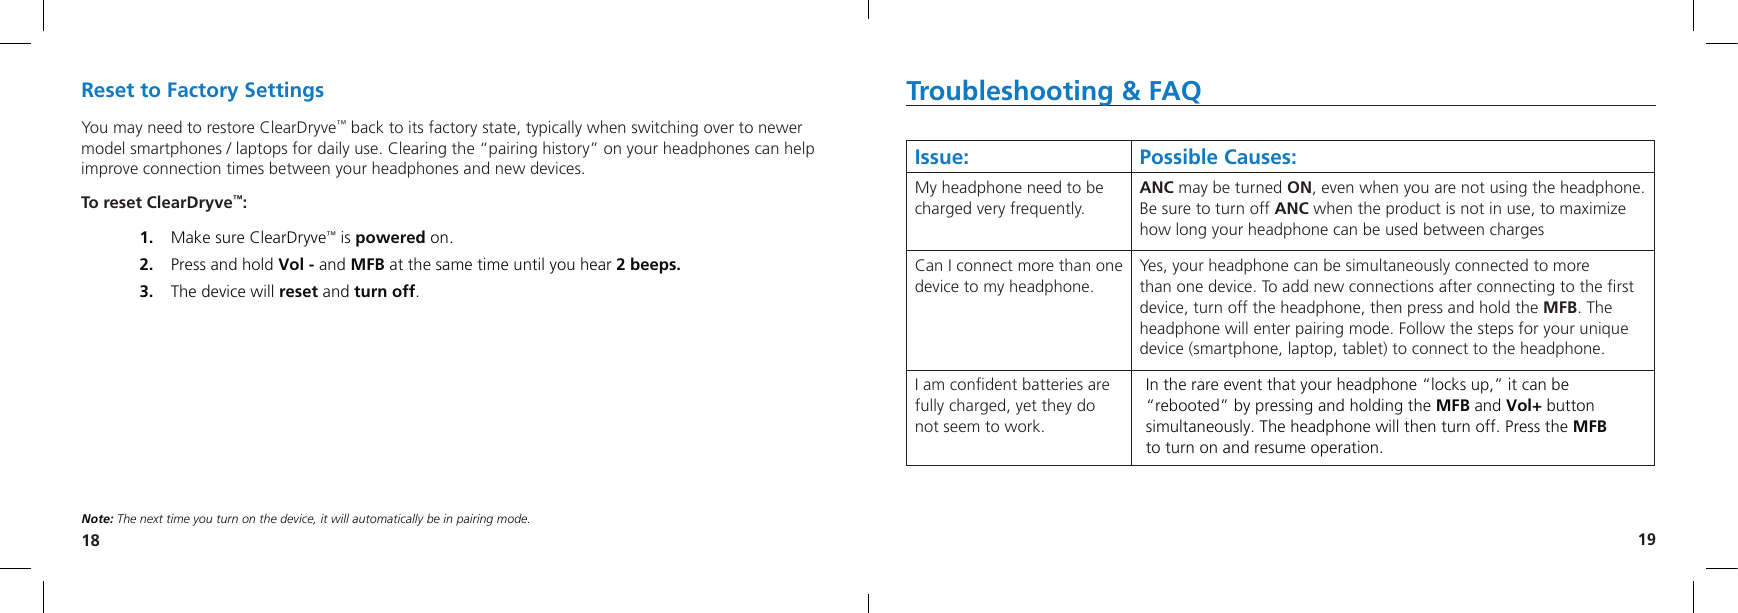 18 19Troubleshooting &amp; FAQIssue: Possible Causes:My headphone need to be charged very frequently.ANC may be turned ON, even when you are not using the headphone.  Be sure to turn off ANC when the product is not in use, to maximize how long your headphone can be used between chargesCan I connect more than one device to my headphone.Yes, your headphone can be simultaneously connected to more  than one device. To add new connections after connecting to the ﬁrst device, turn off the headphone, then press and hold the MFB. The headphone will enter pairing mode. Follow the steps for your unique device (smartphone, laptop, tablet) to connect to the headphone. I am conﬁdent batteries are fully charged, yet they do not seem to work.In the rare event that your headphone “locks up,” it can be “rebooted” by pressing and holding the MFB and Vol+ button simultaneously. The headphone will then turn off. Press the MFB  to turn on and resume operation. Reset to Factory SettingsYou may need to restore ClearDryve™ back to its factory state, typically when switching over to newer model smartphones / laptops for daily use. Clearing the “pairing history” on your headphones can help improve connection times between your headphones and new devices.To reset ClearDryve™:1.   Make sure ClearDryve™ is powered on.2.   Press and hold Vol - and MFB at the same time until you hear 2 beeps.3.   The device will reset and turn off.Note: The next time you turn on the device, it will automatically be in pairing mode.